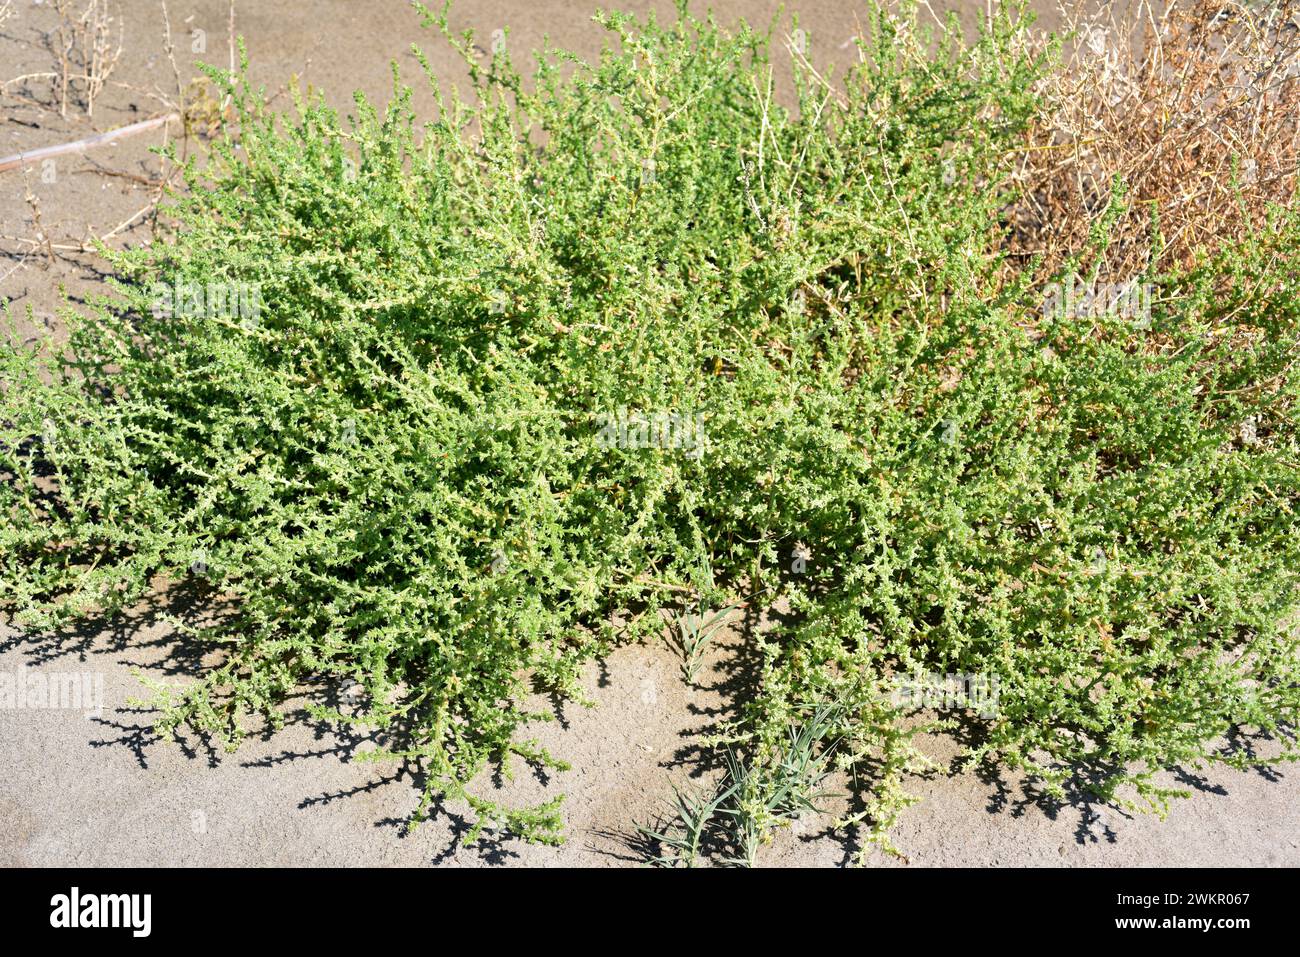 Prickly glasswort or prickly saltwort (Salsola kali or Kali turgidum) is an annual plant native to coast dunes to Eurasia and northern Africa. This ph Stock Photo